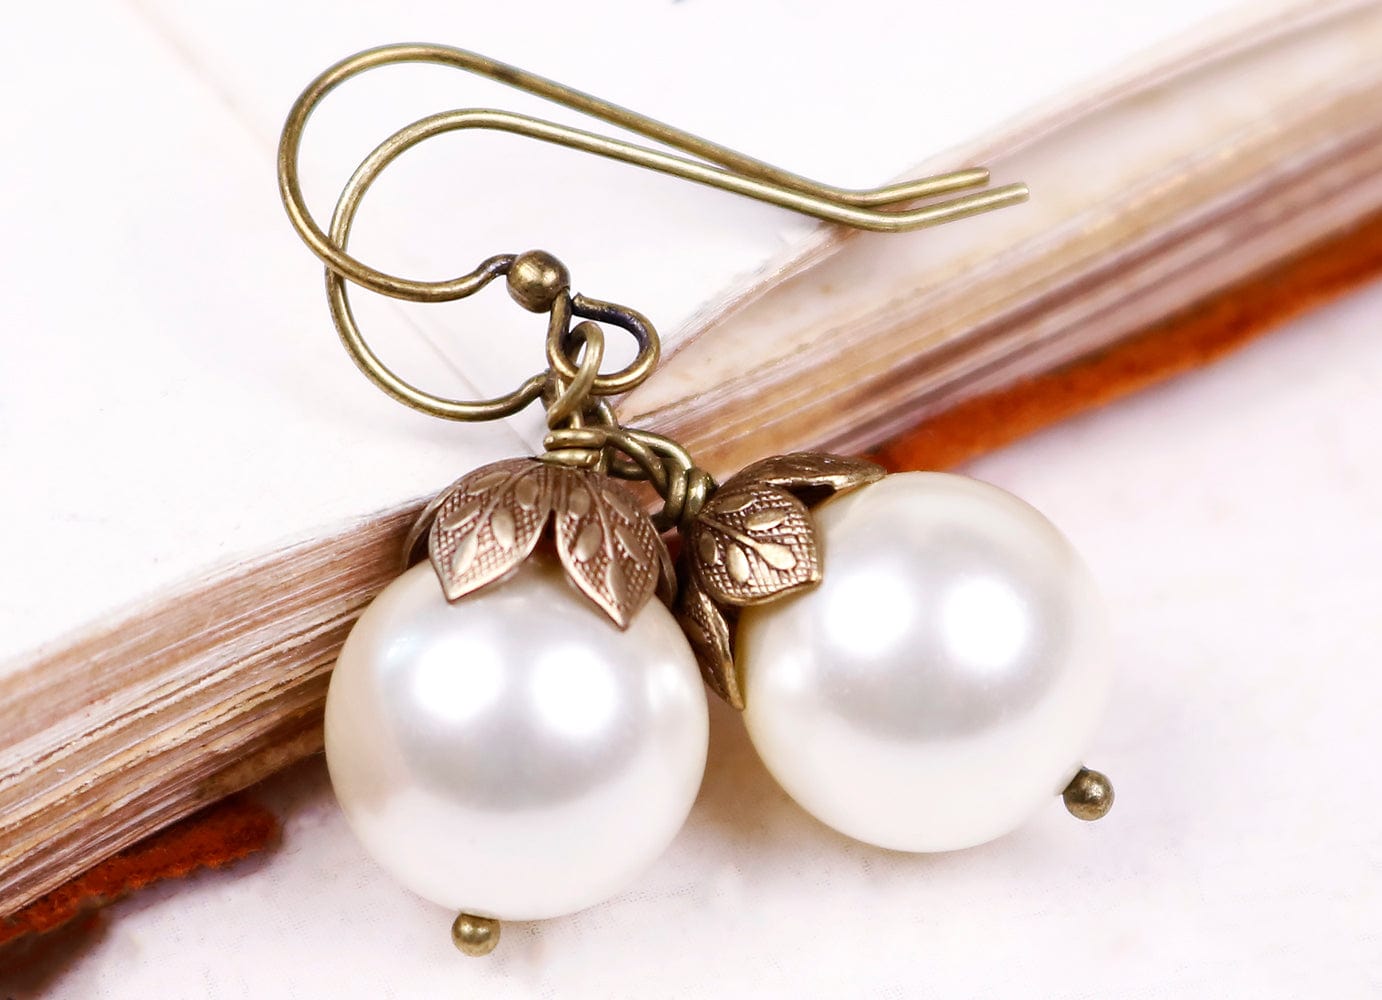 Aquitaine Pearl Drop Earrings in Cream Pearl and Antiqued Brass by Rabbitwood and Reason